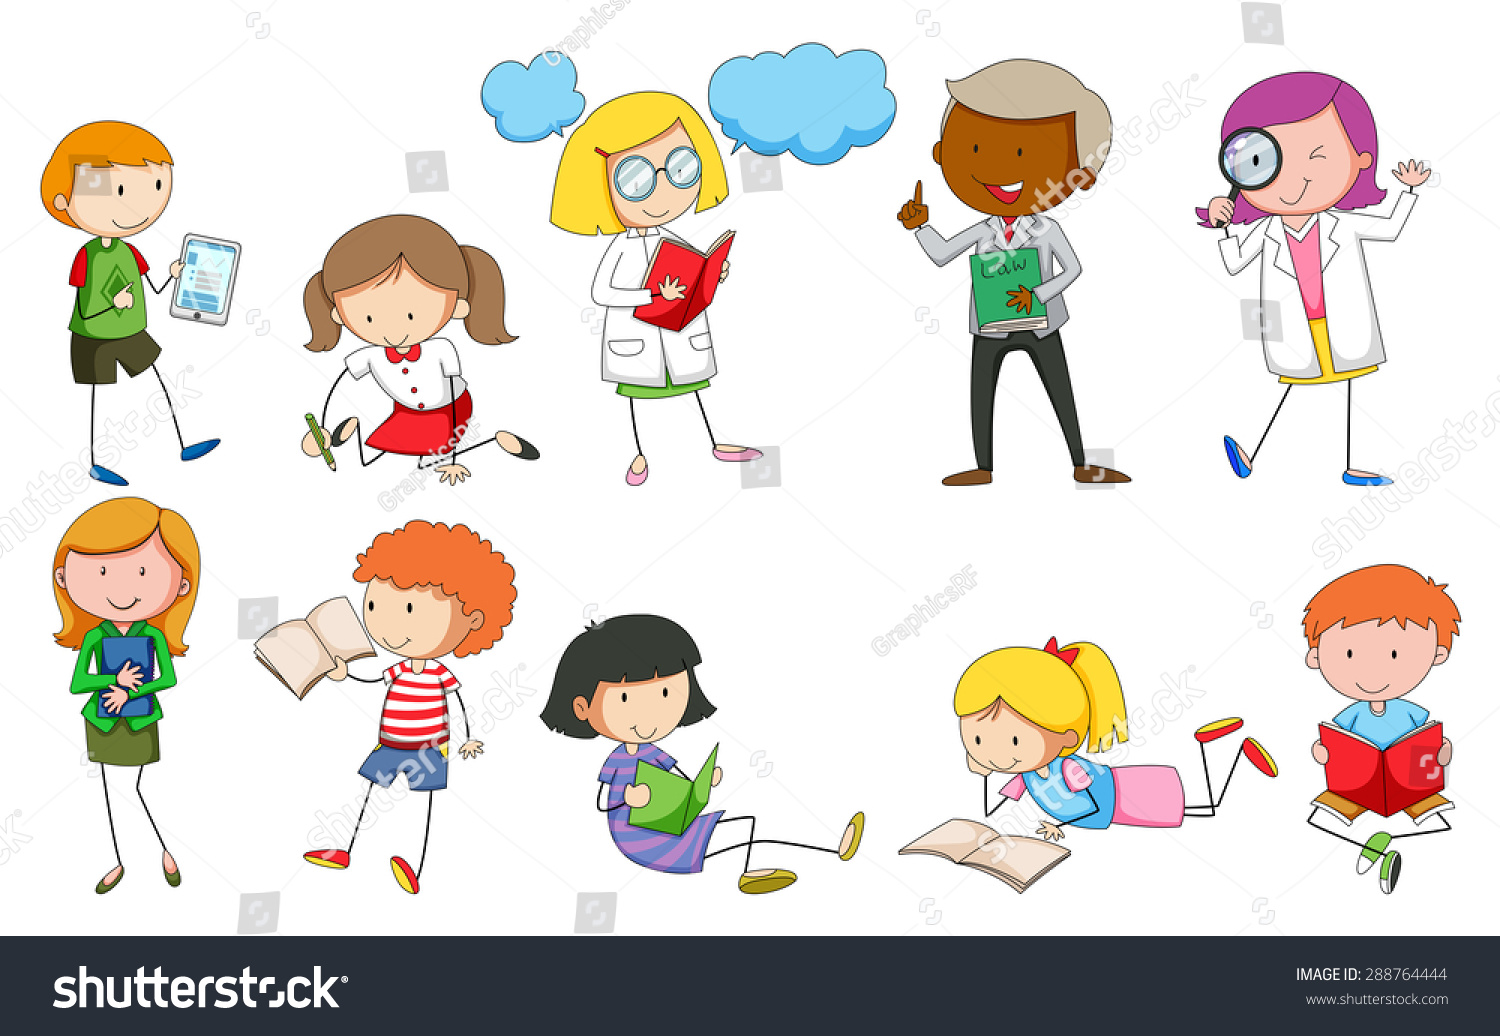 Man Woman Doing Different Activities Stock Vector (Royalty Free ...